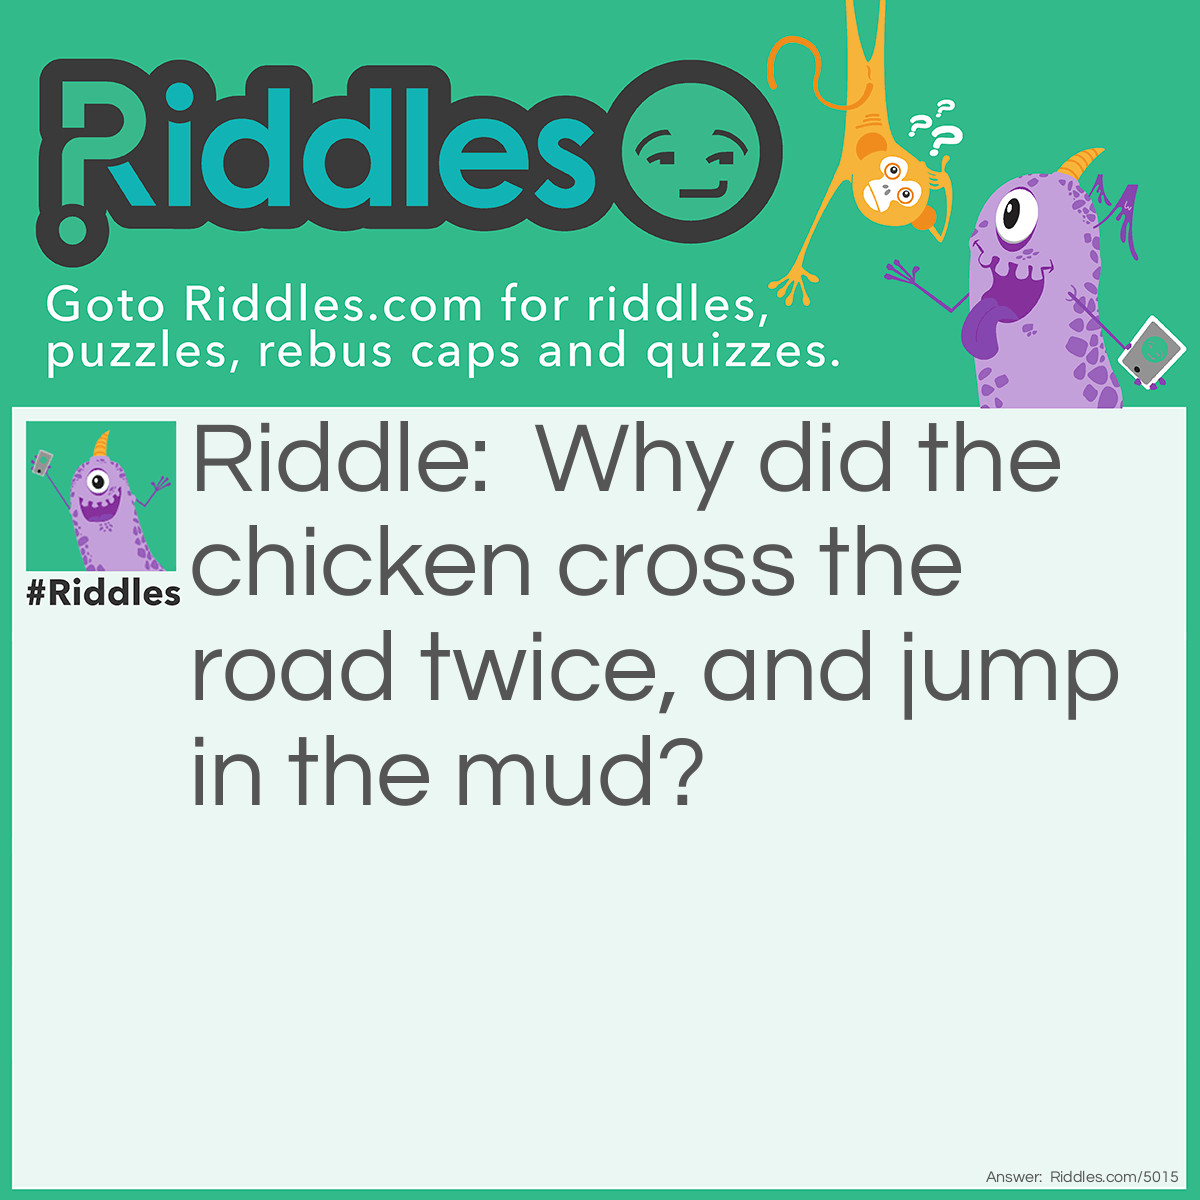 Riddle: Why did the chicken cross the road twice, and jump in the mud? Answer: He was a dirty double-crosser.